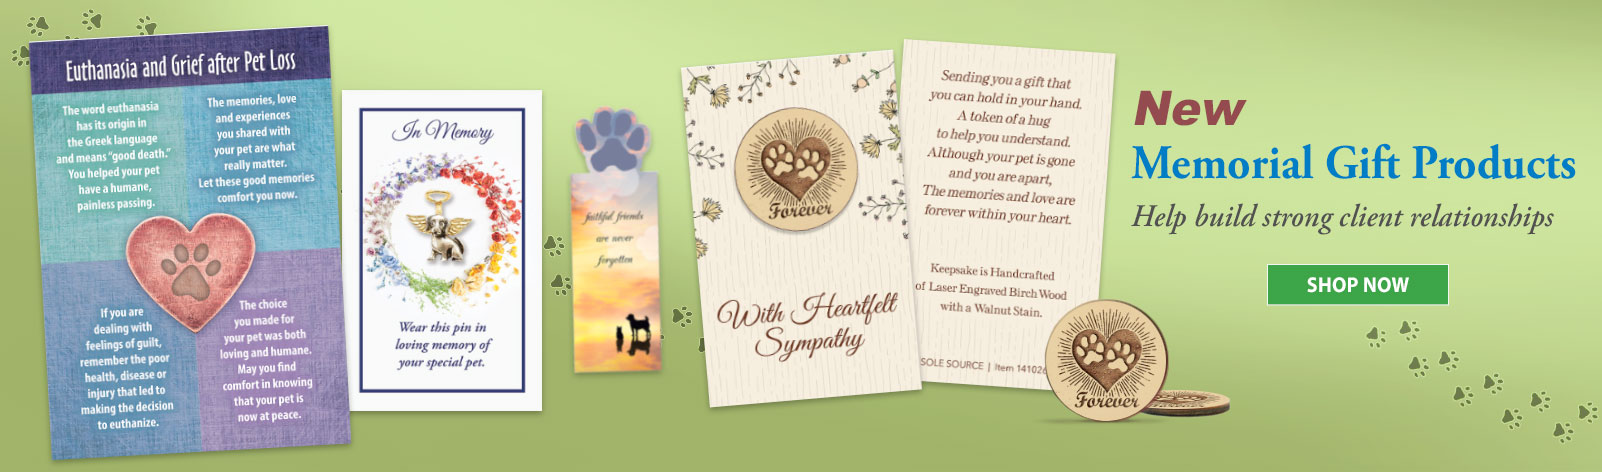 Veterinary Memorial Products Help Build Strong Client Relationships!